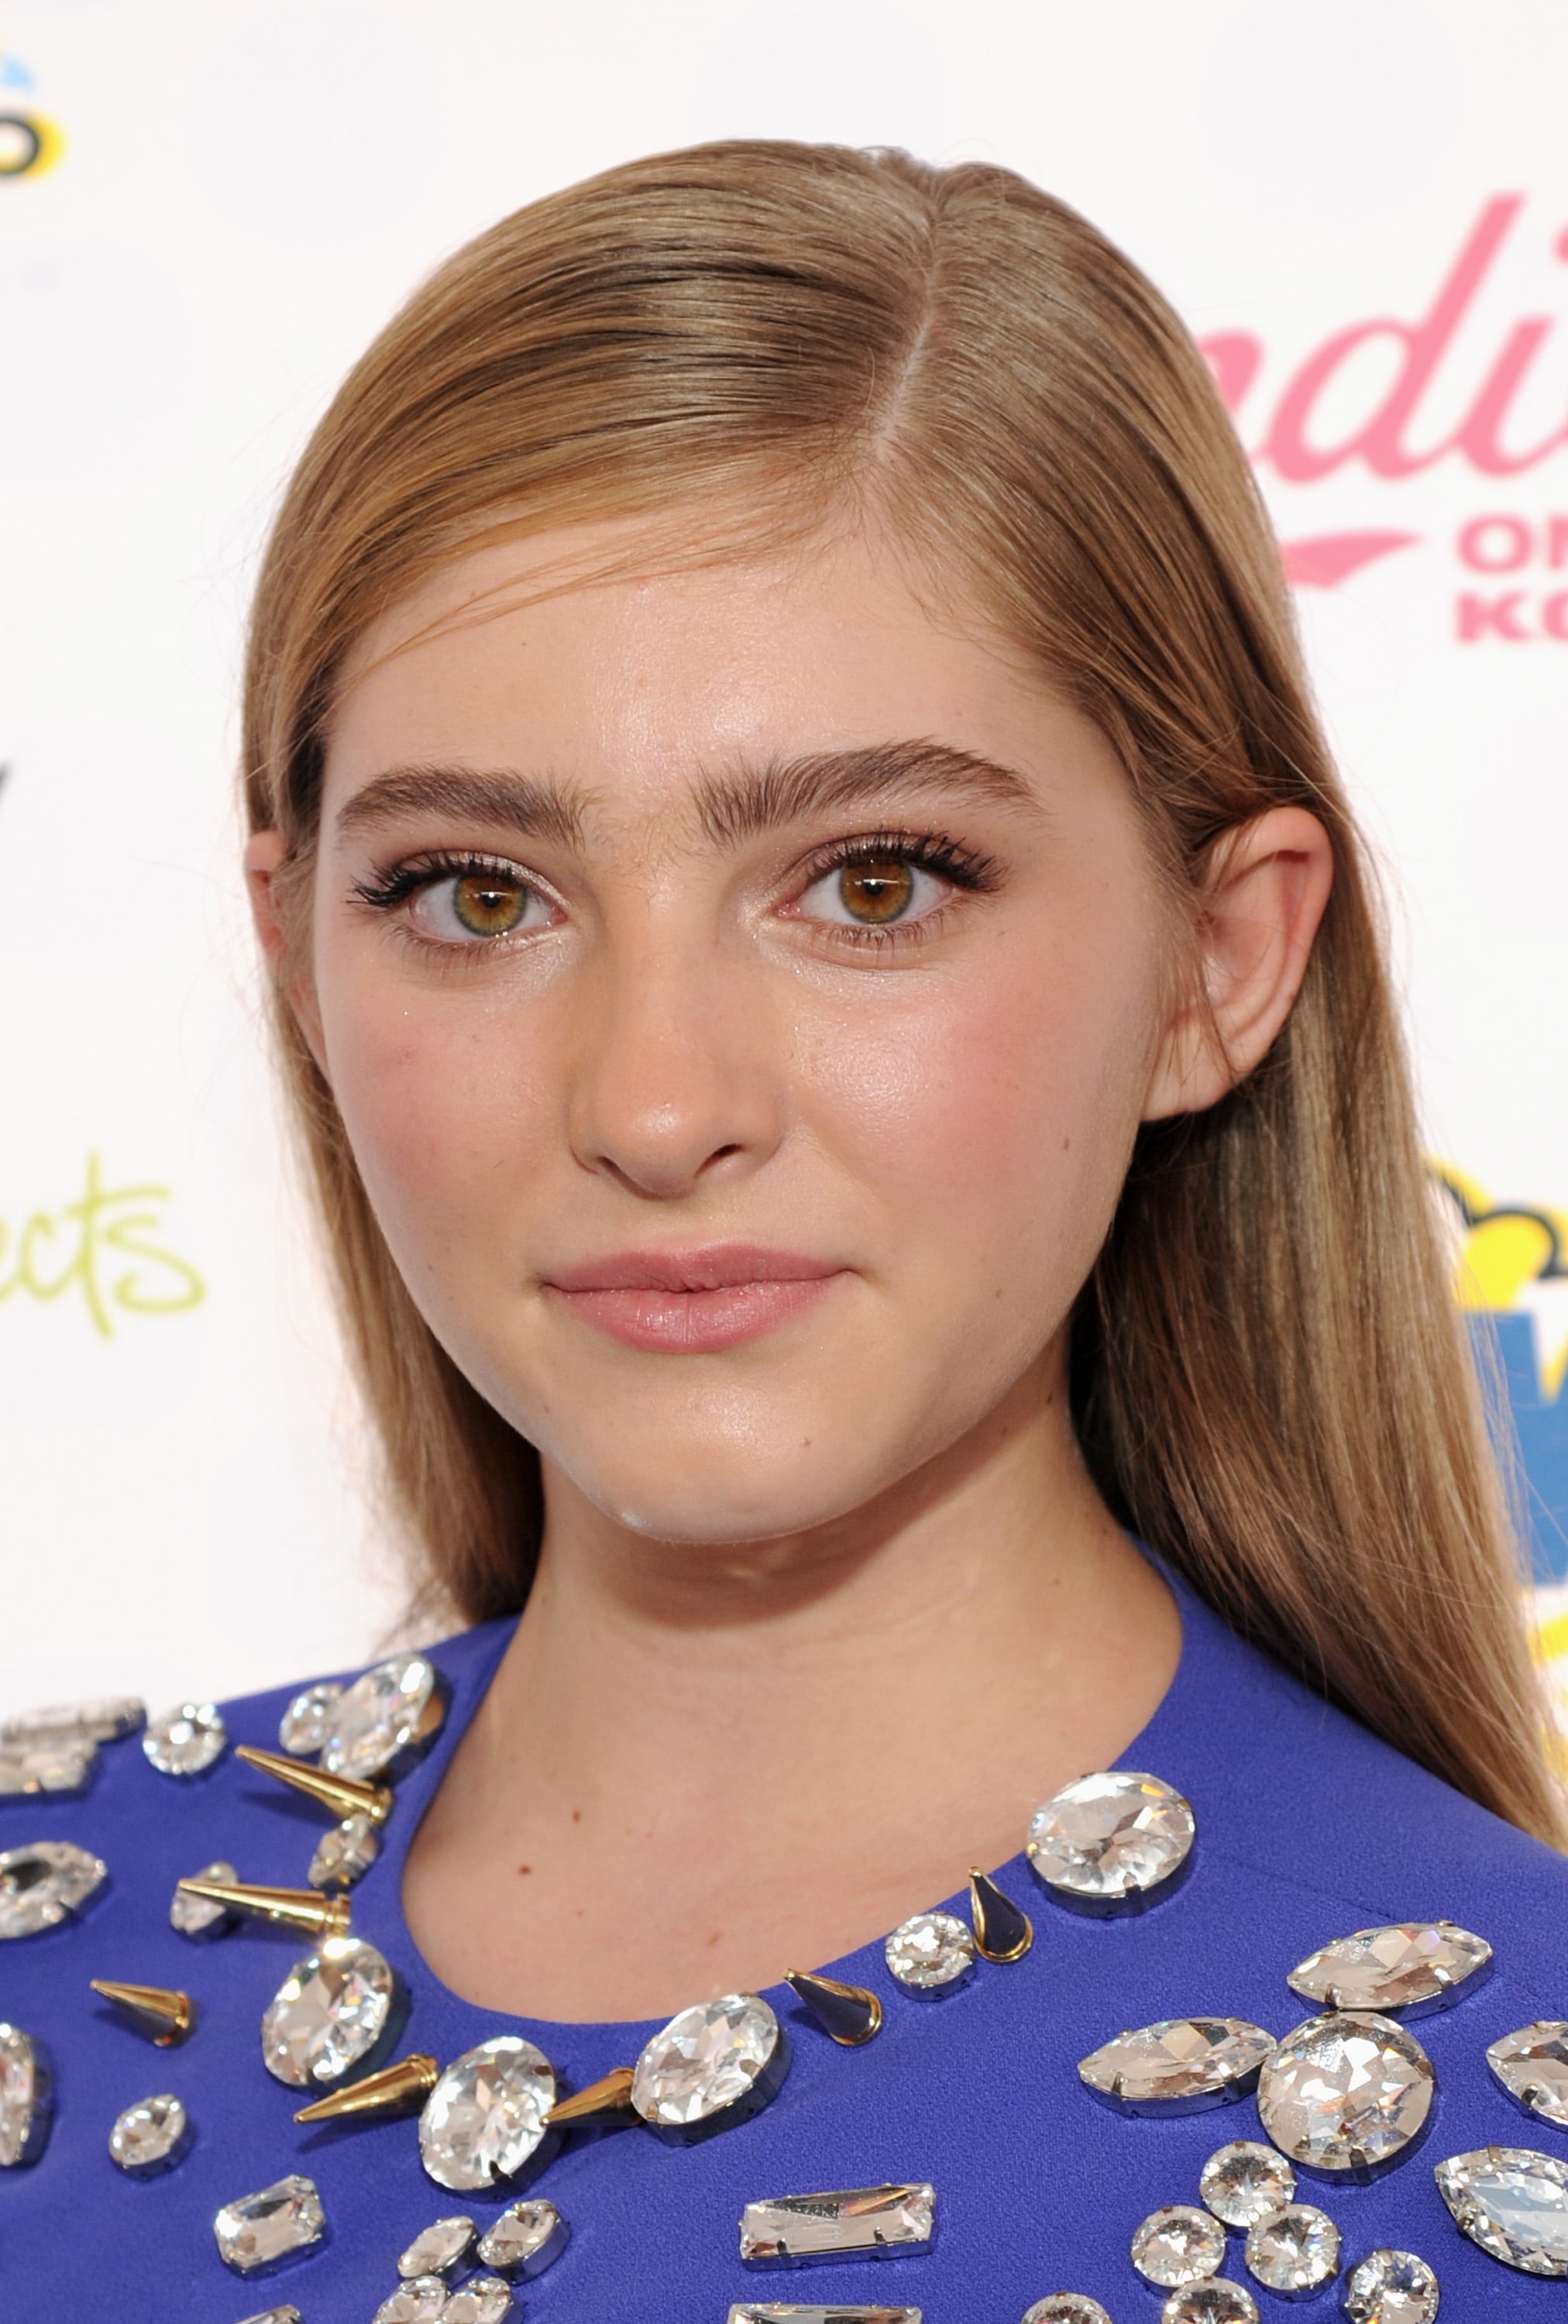 Willow Shields The Choicest Beauty Looks At The Teen Choice Awards